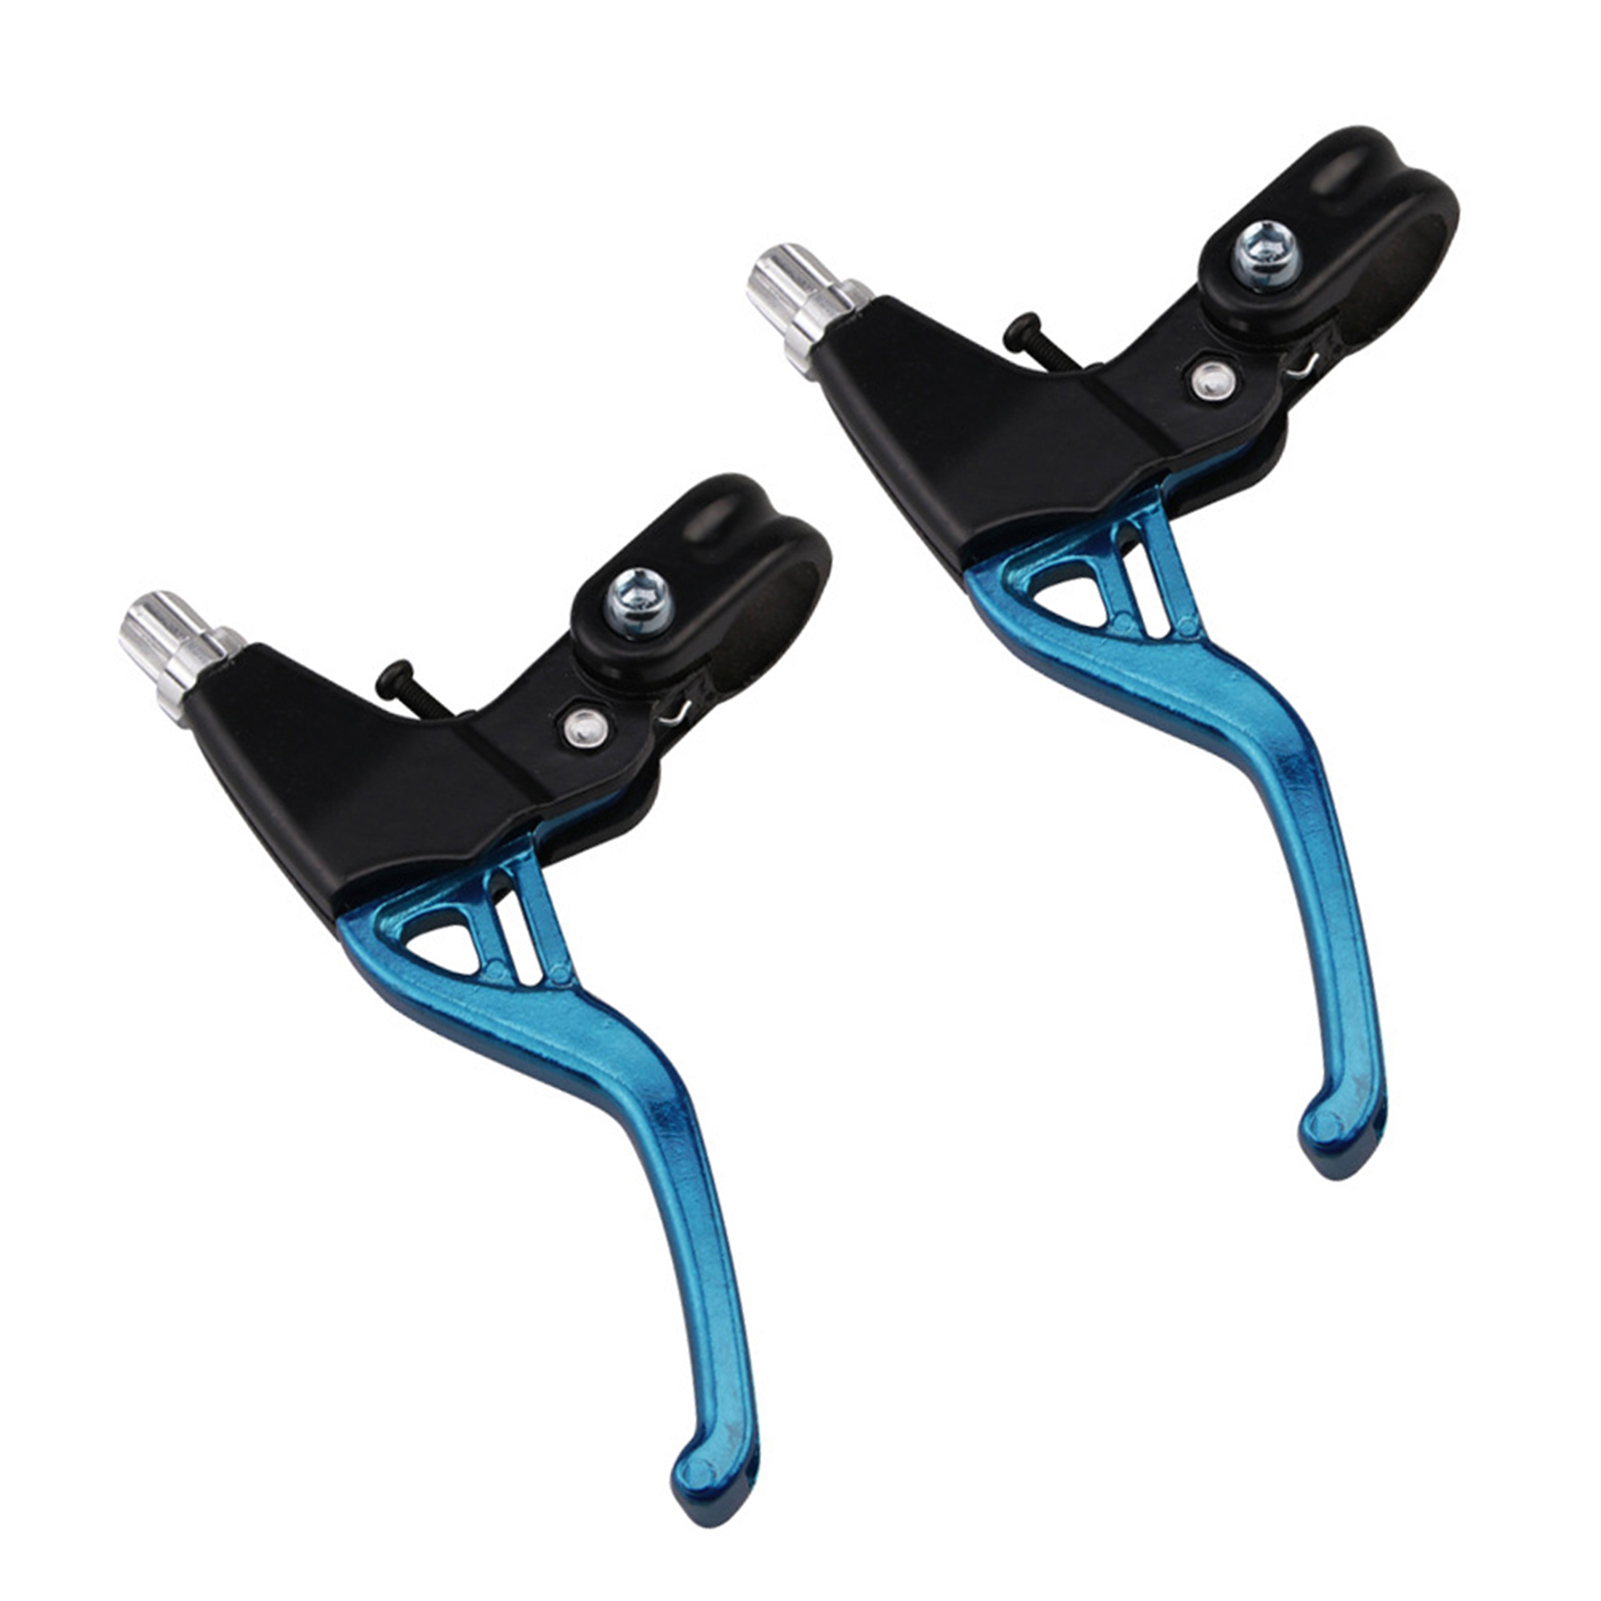 V-BRAKE BIKE LEVER-Adults,Childrens Bicycles In BLUE RED BLACK SILVERY PAIR